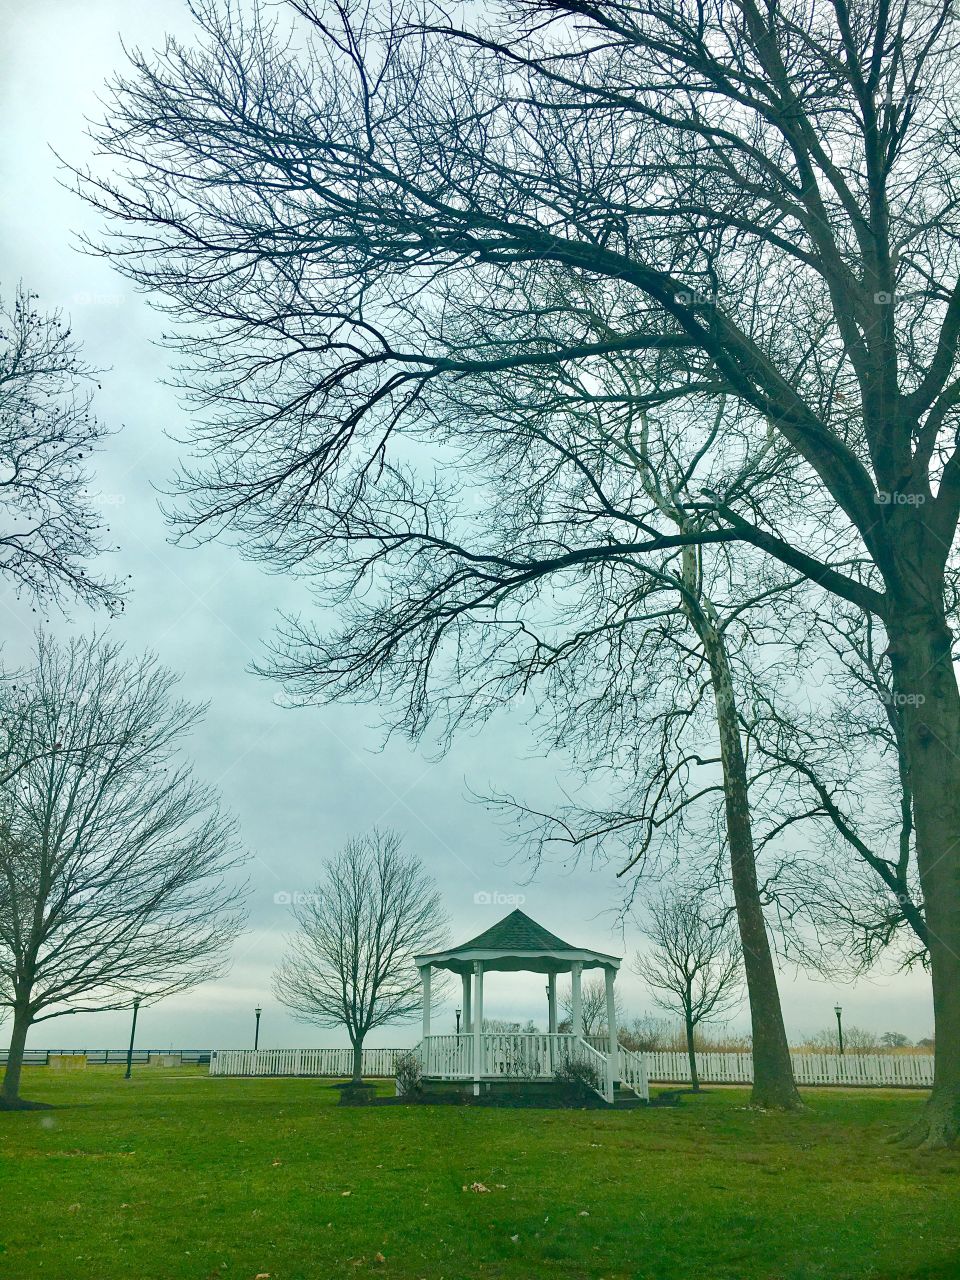 Delaware City Waterfront. Bare, winter trees. Beautiful, green grass.